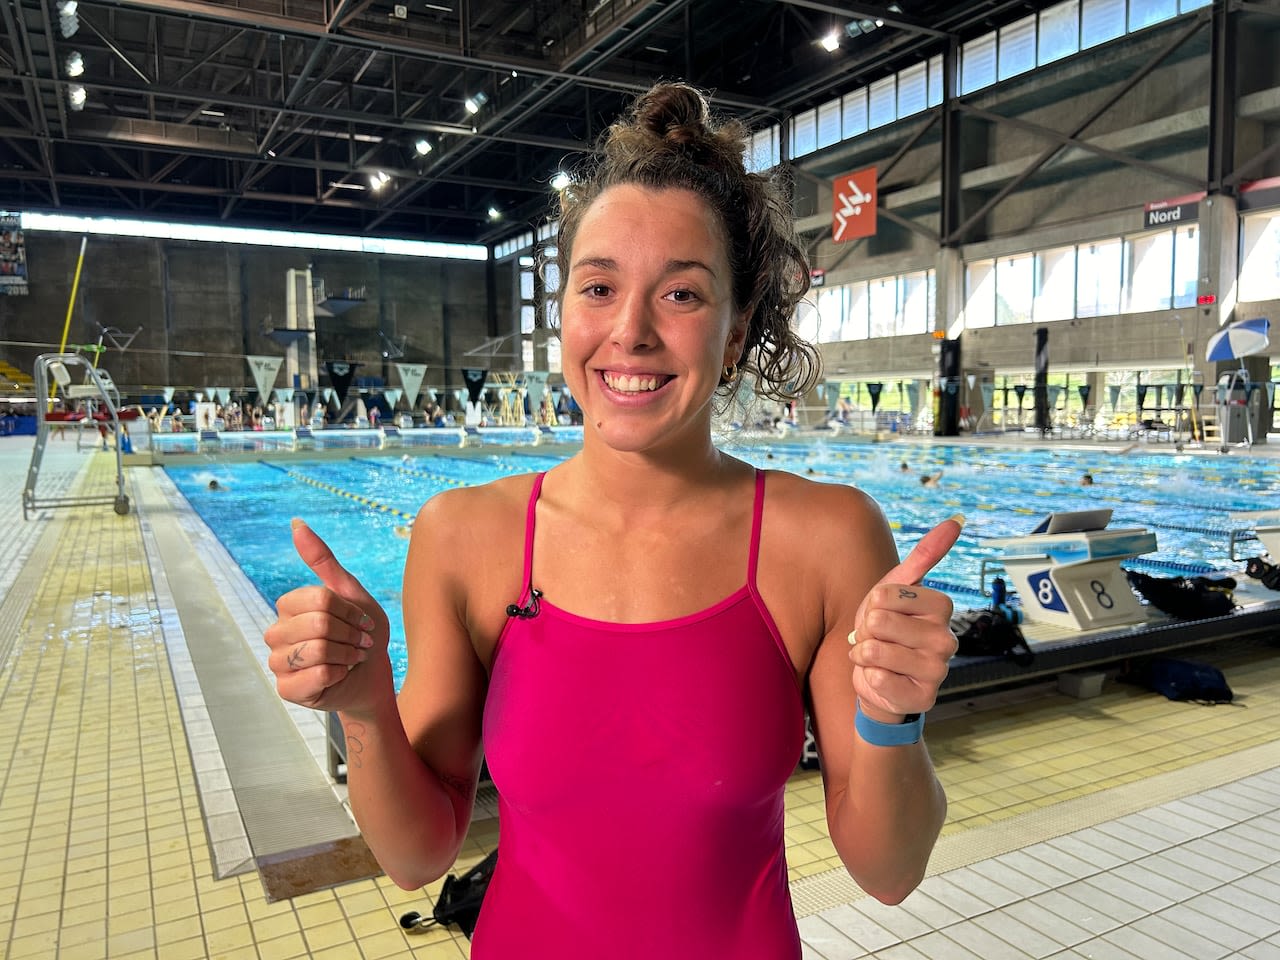 'I know my strength': Quebec swimmer sets sights on Paris Olympics after arduous journey